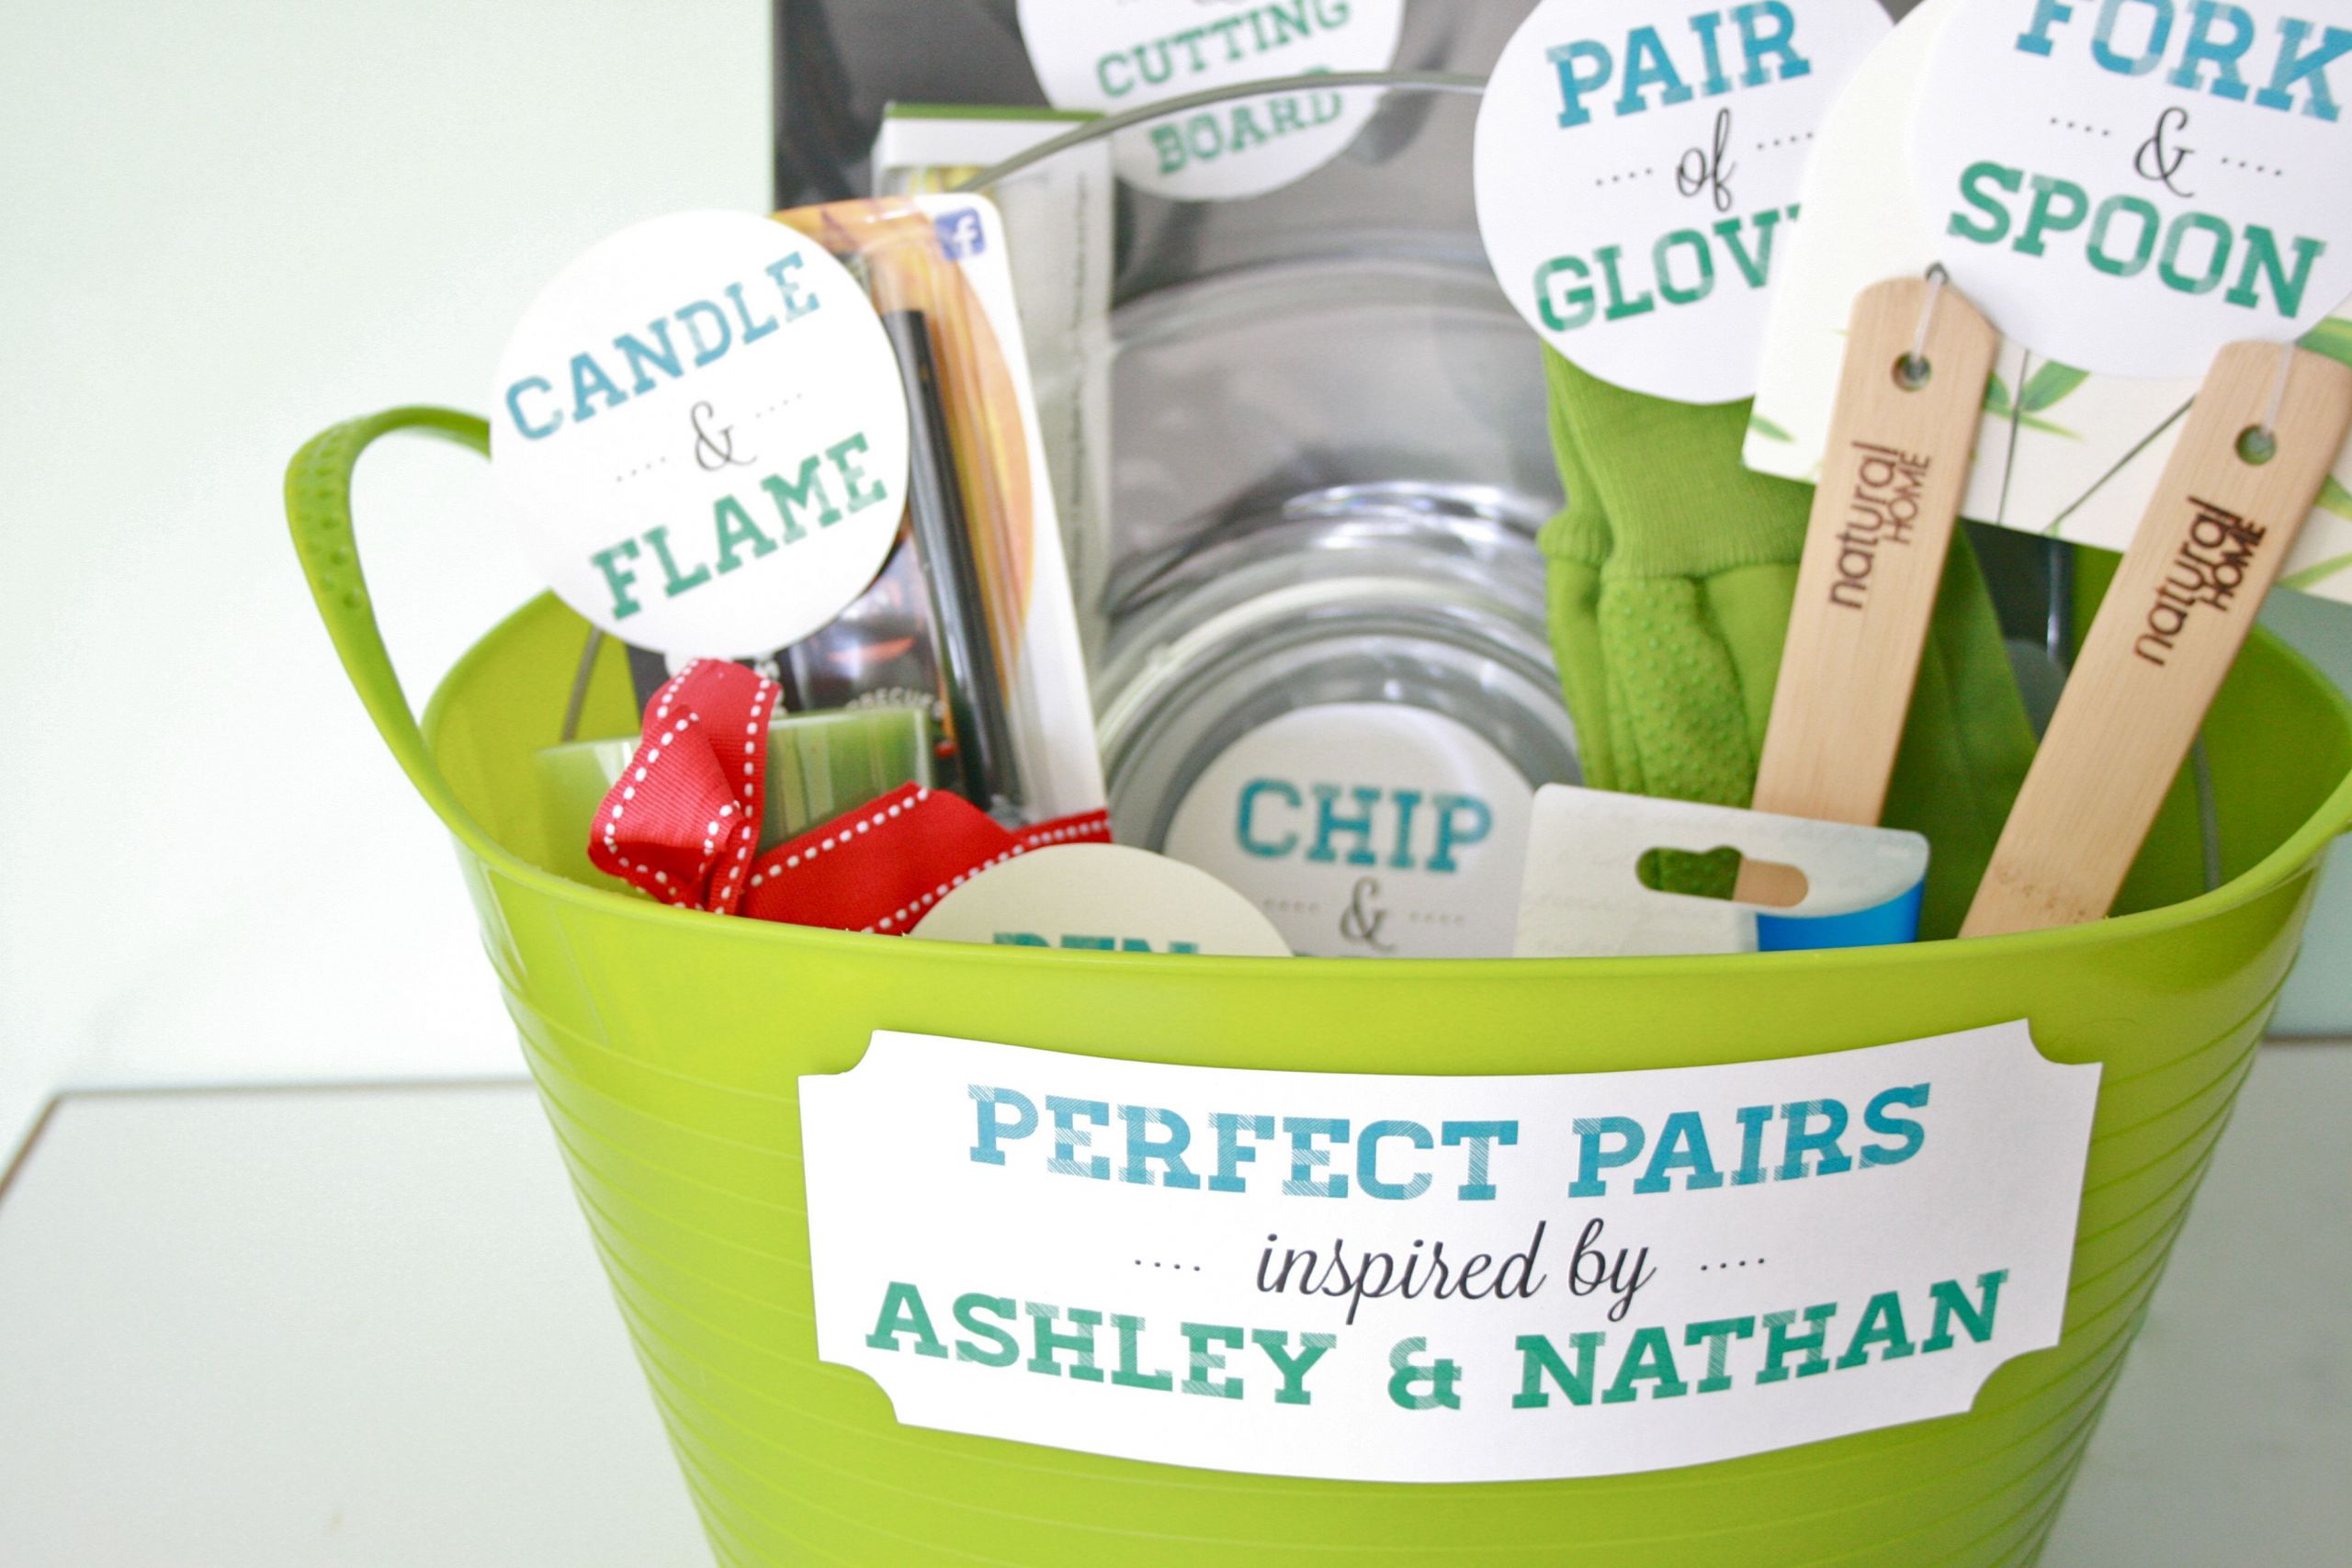 DIY Couples Gift Ideas
 DIY "Perfect Pairs" Bridal Shower Gift